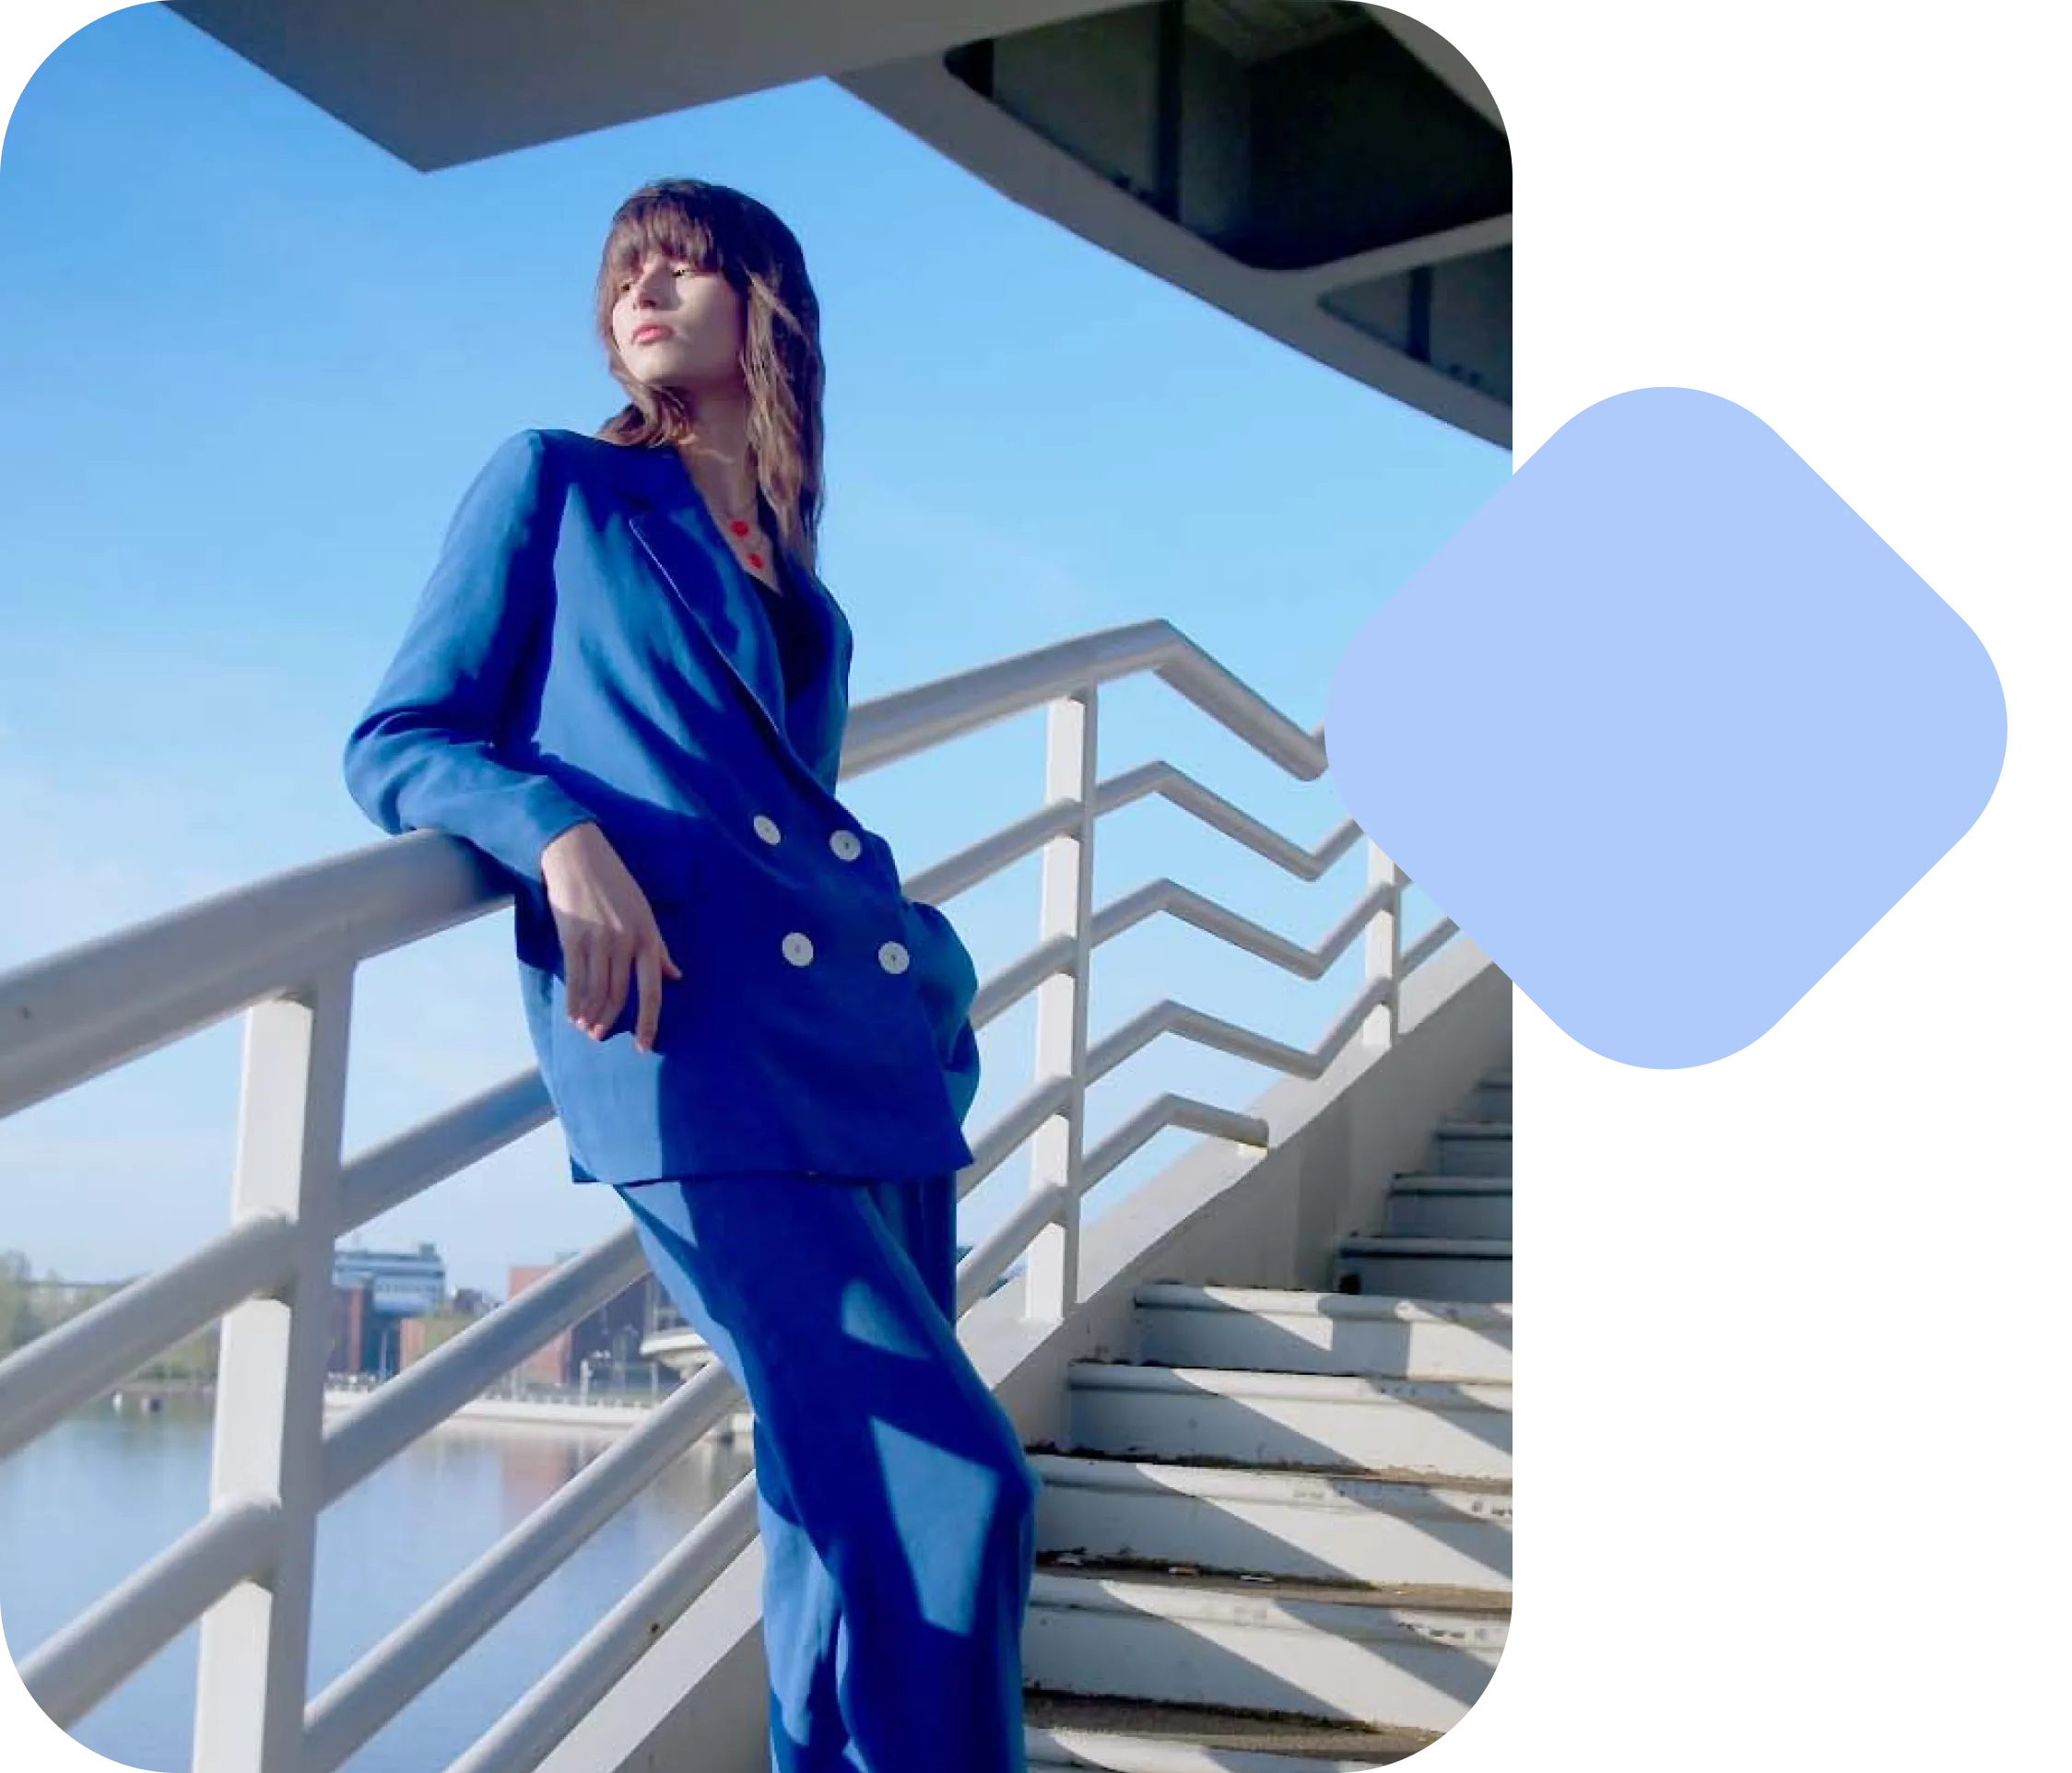 An image of a Lens shopping use case featuring a woman with a blue blazer with an overlapping blue shape.